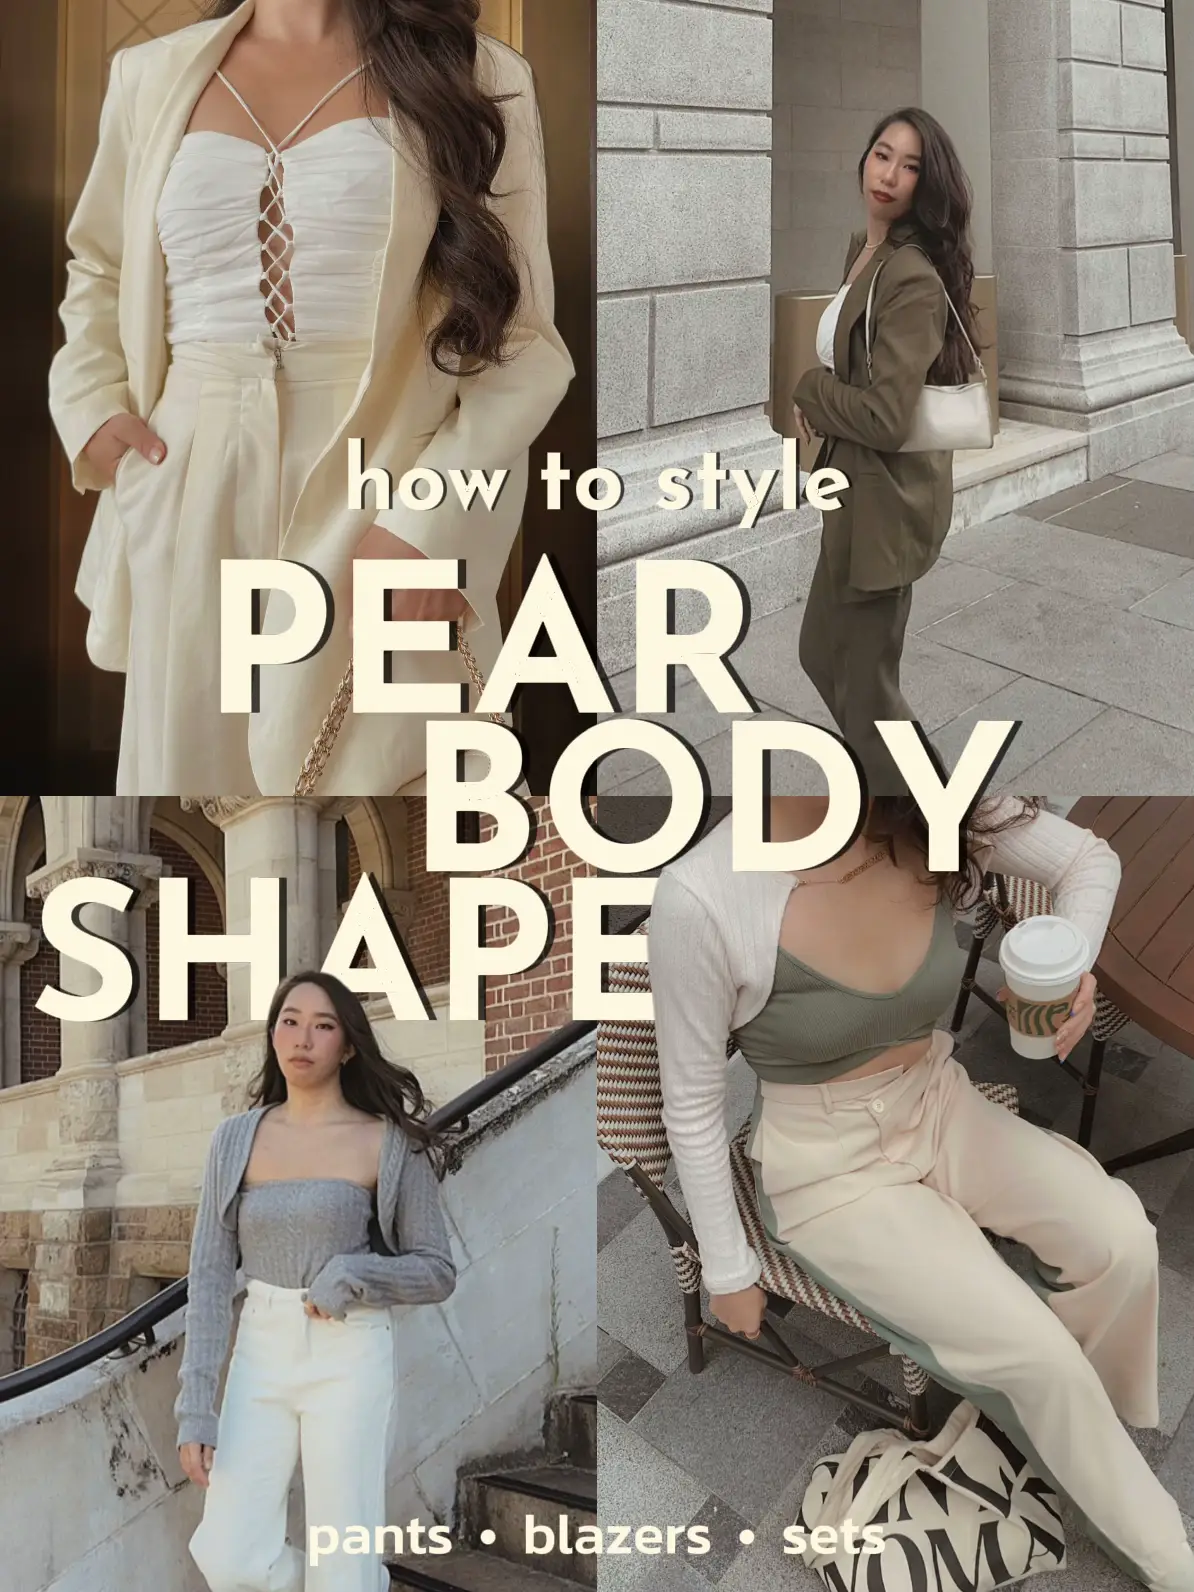 HOW TO STYLE A PEAR-SHAPED BODY 🍐 PT. 2